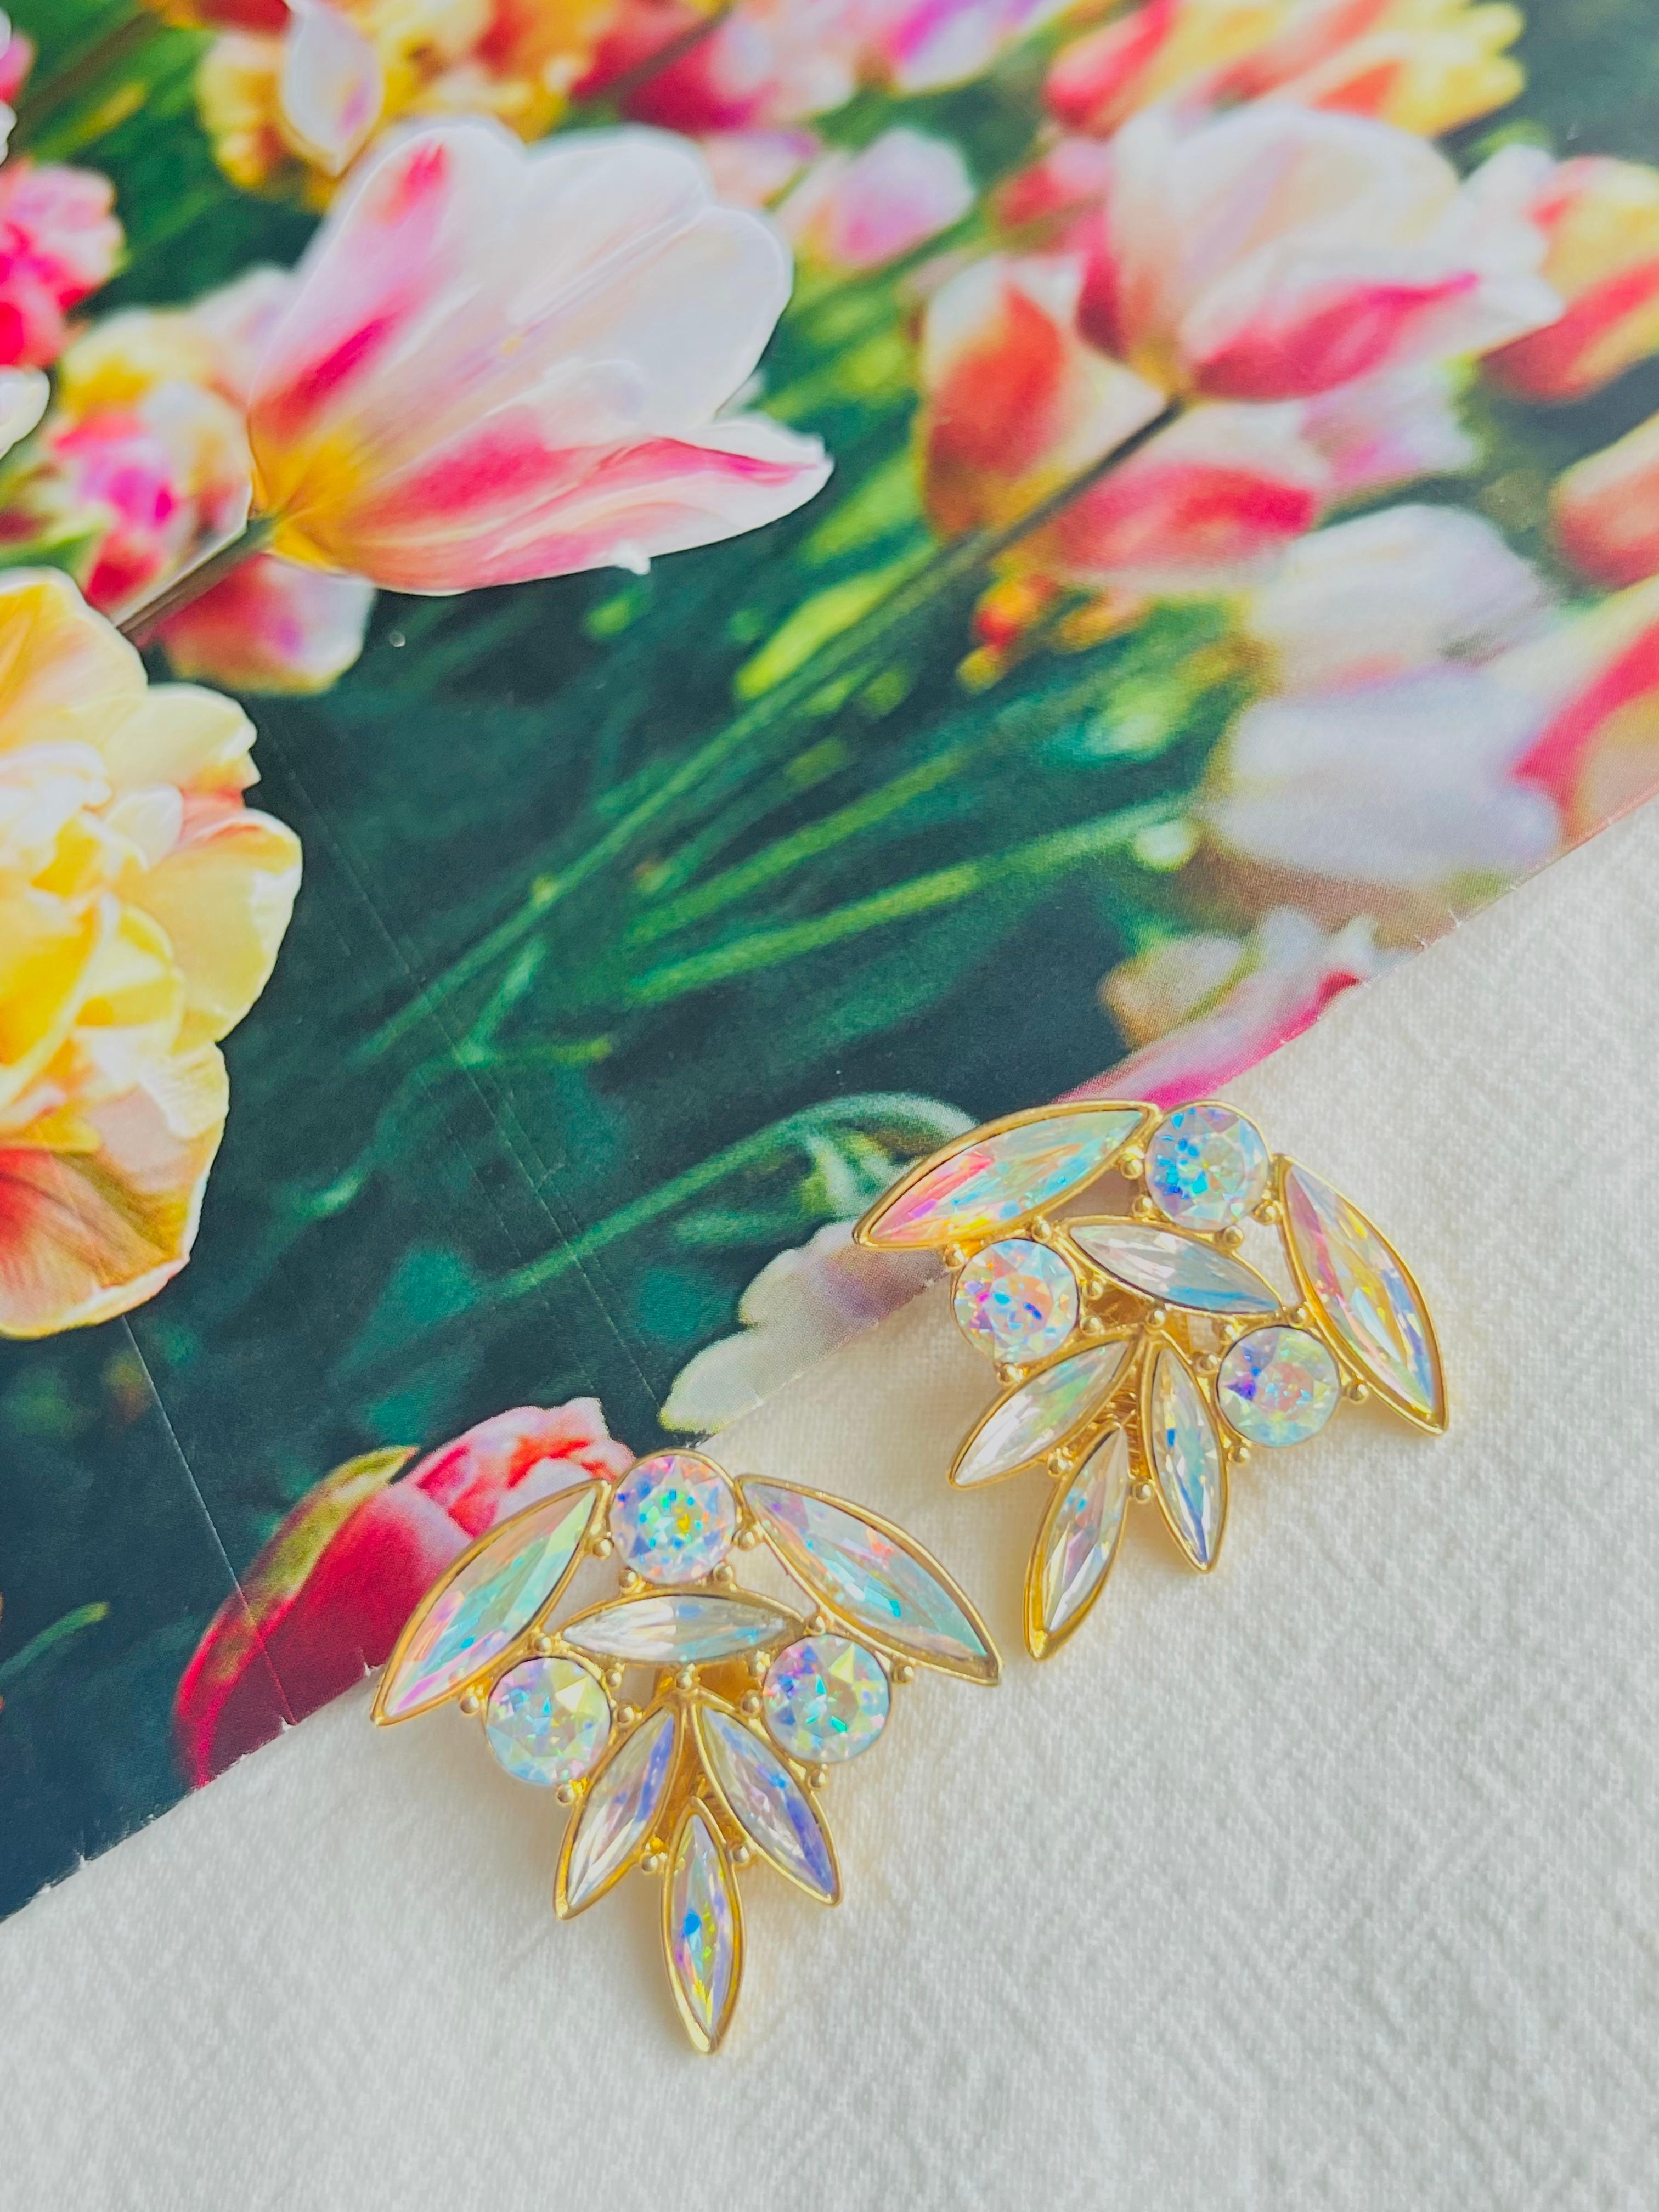 Yves Saint Laurent YSL Vintage Aurora Borealis Cluster Crystals Flower Earrings In Excellent Condition For Sale In Wokingham, England